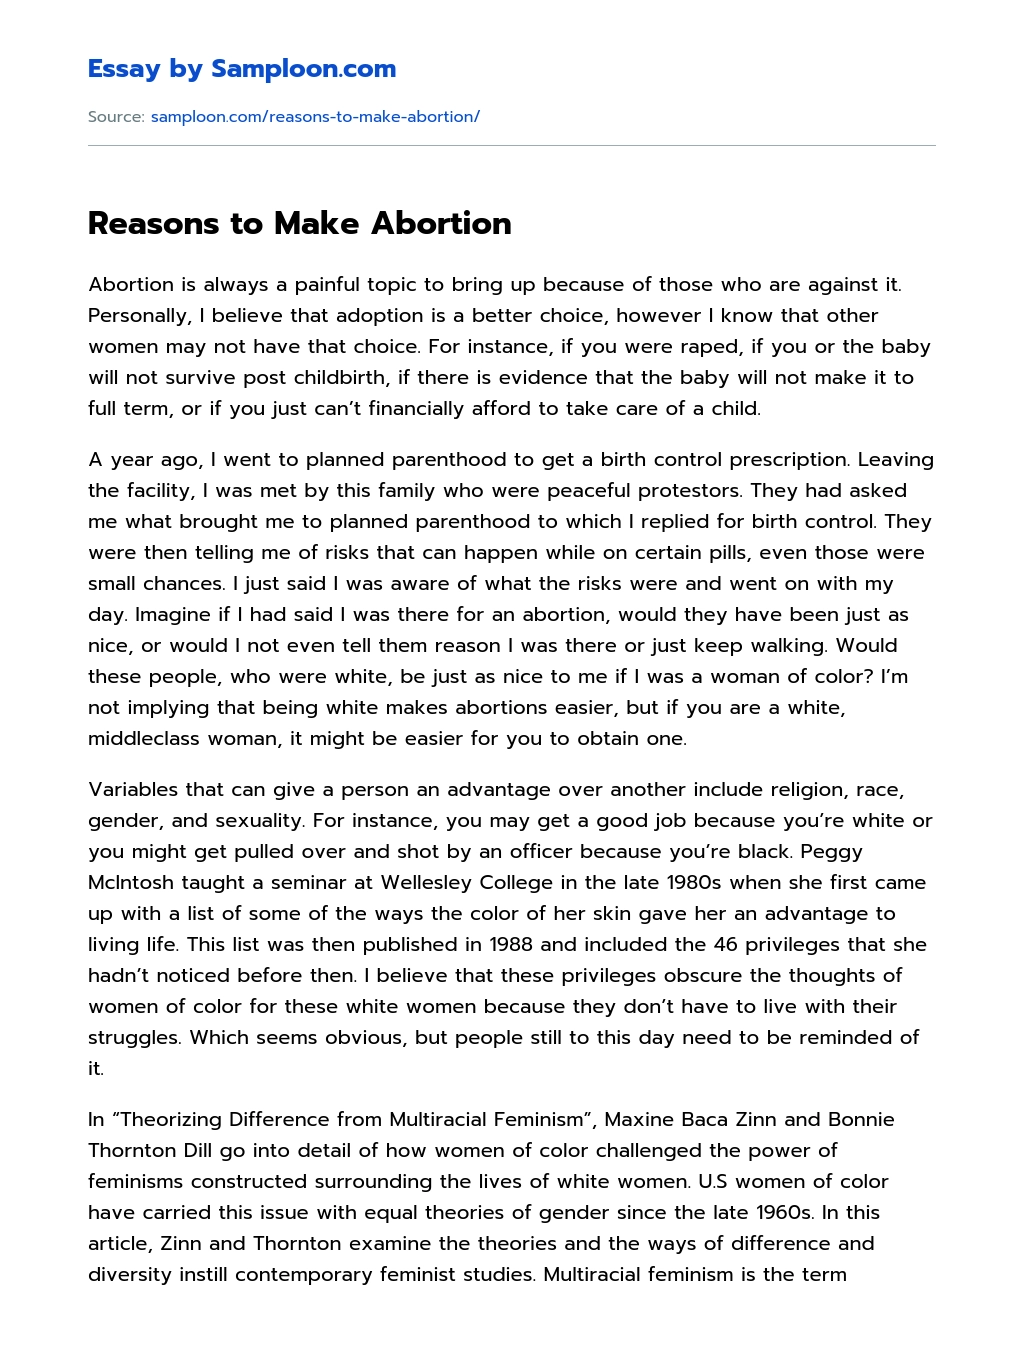 Reasons to Make Abortion essay